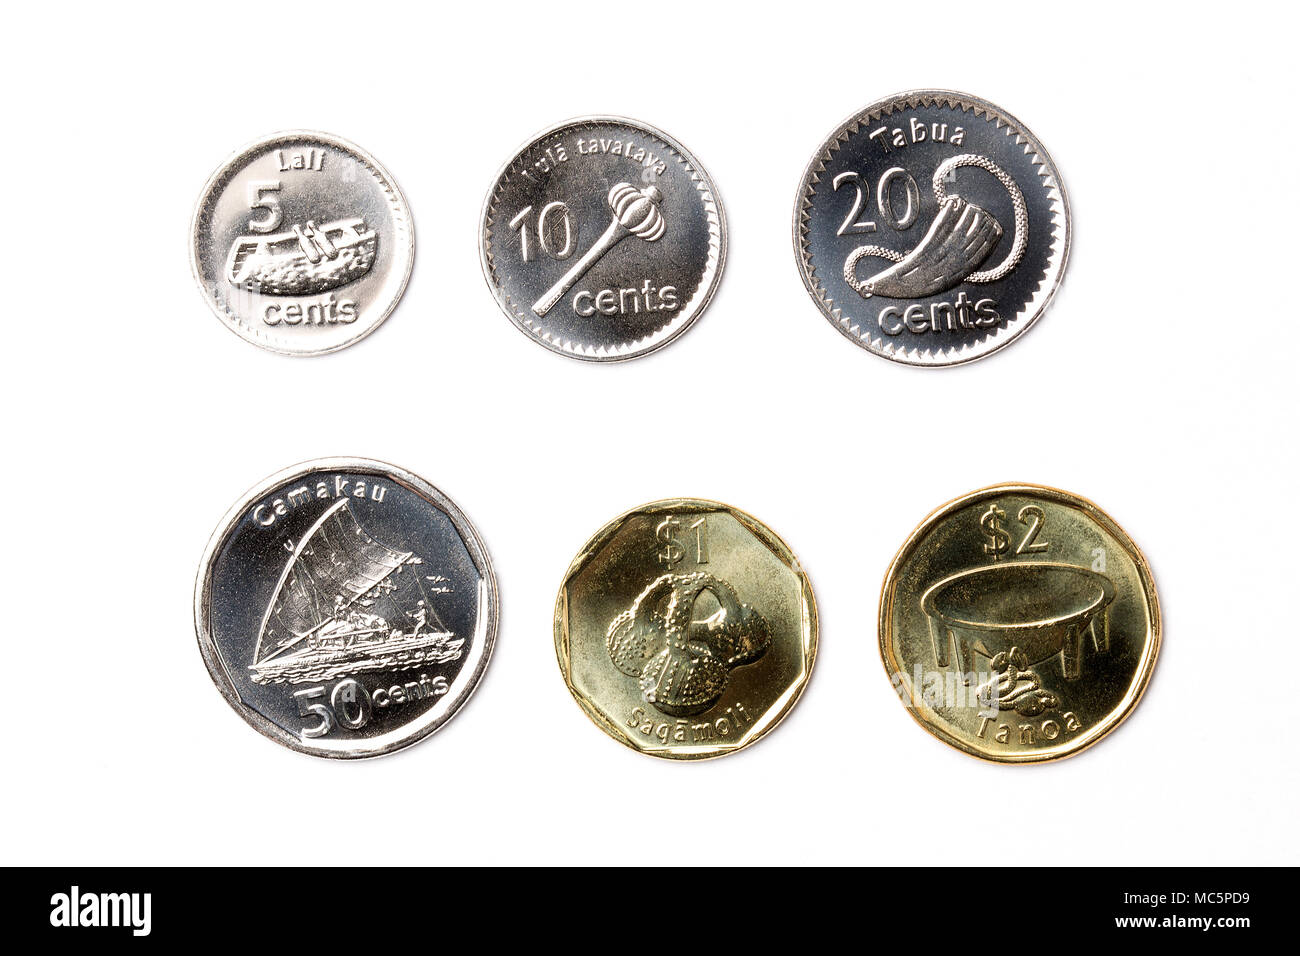 Coins from Fiji on a white background Stock Photo